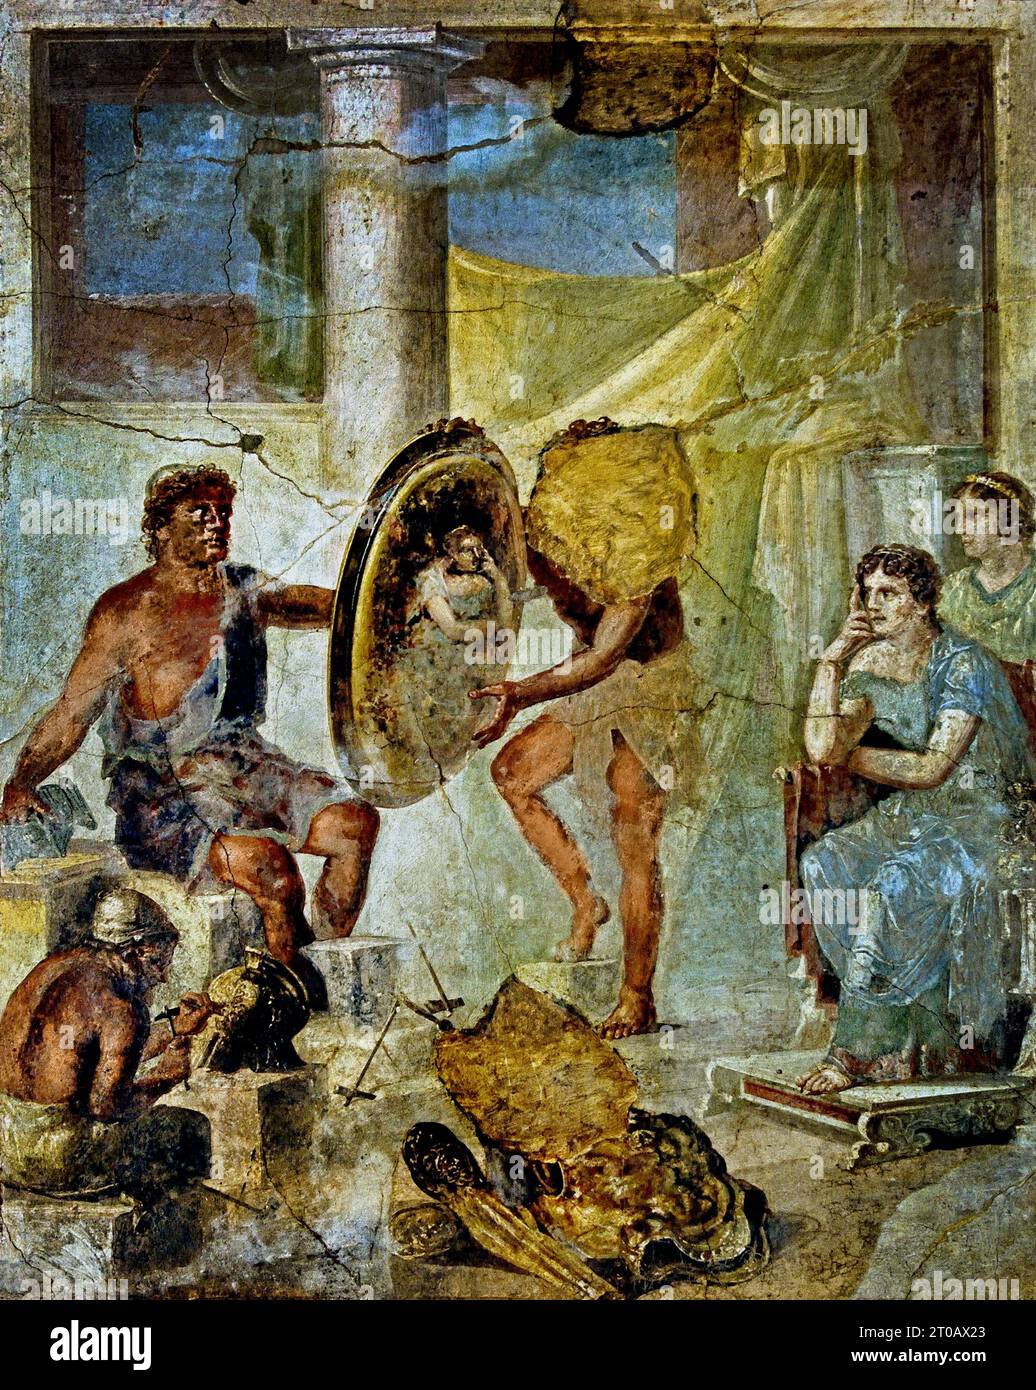 Thetsis looking at her reflection  a golden shield that Hephaistos has made for Achilles (Troy) ,Fresco Pompeii Roman City is located near Naples in the Campania region of Italy. Pompeii was buried under 4-6 m of volcanic ash and pumice in the eruption of Mount Vesuvius in AD 79. Italy Stock Photo